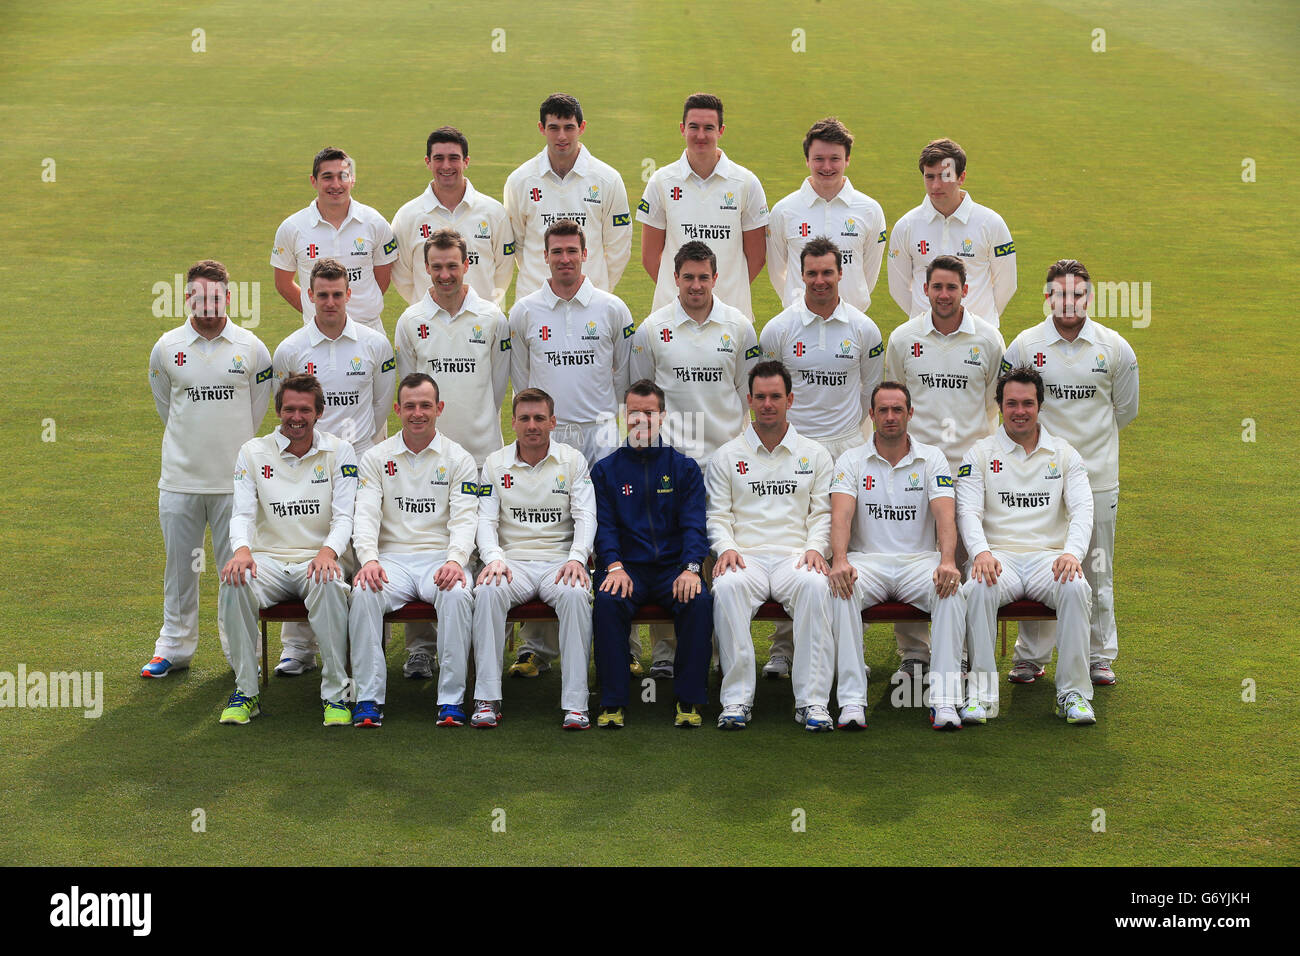 Glamorgan Cricket Club team line up (back row left to right) Andrew Salter, Ruaidhri Smith, Mike Reed, Jack Murphy, Aneurin Donald, Kieran Bull (middle row) David Lloyd, Ben Wright, Huw Waters, John Glover, Will Owen, Stewart Walters, Chris Cooke, Will Bragg (front row) Michael Hogan, Graham Wagg, Mark Wallace (c), Toby Radford (Head Coach), Jim Allenby (T20 Captain), Dean Cosker and Gareth Rees during the media day at the SWALEC Stadium, Cardiff. Stock Photo